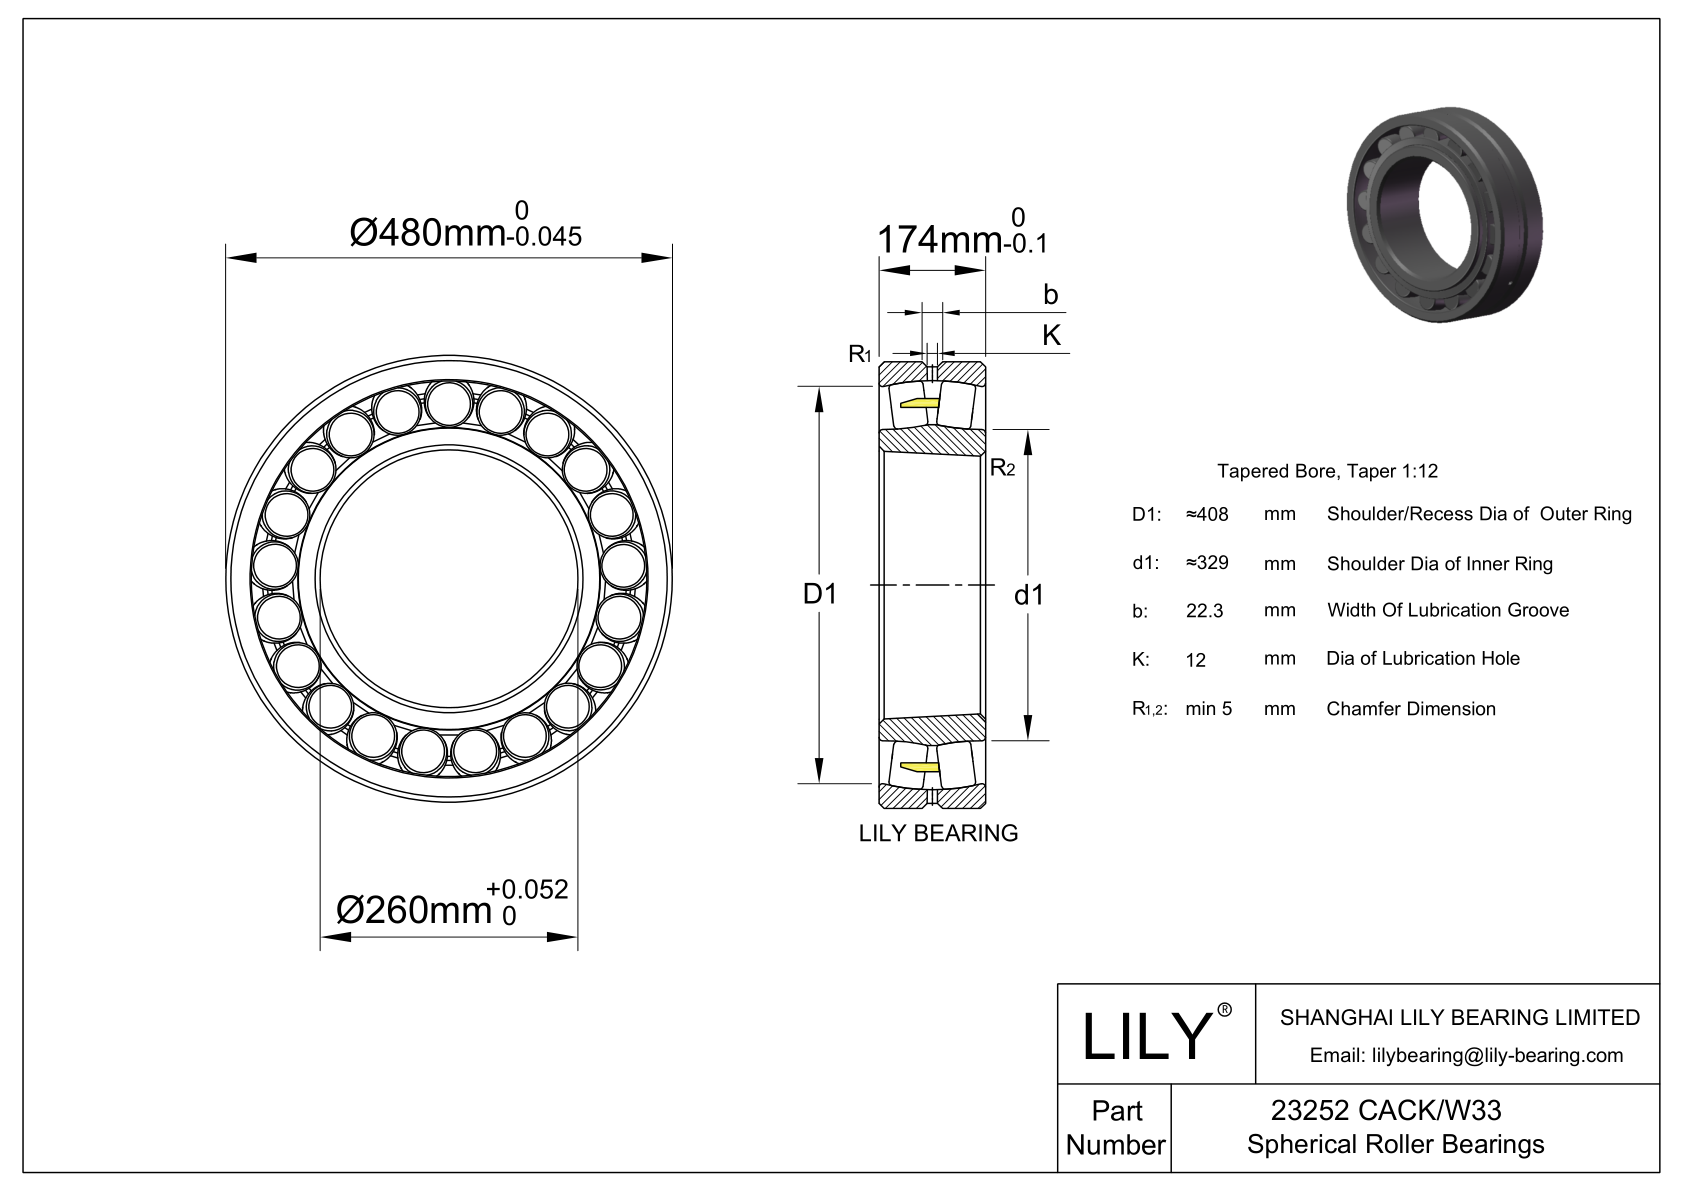 23252 CACK/W33 Double Row Spherical Roller Bearing cad drawing